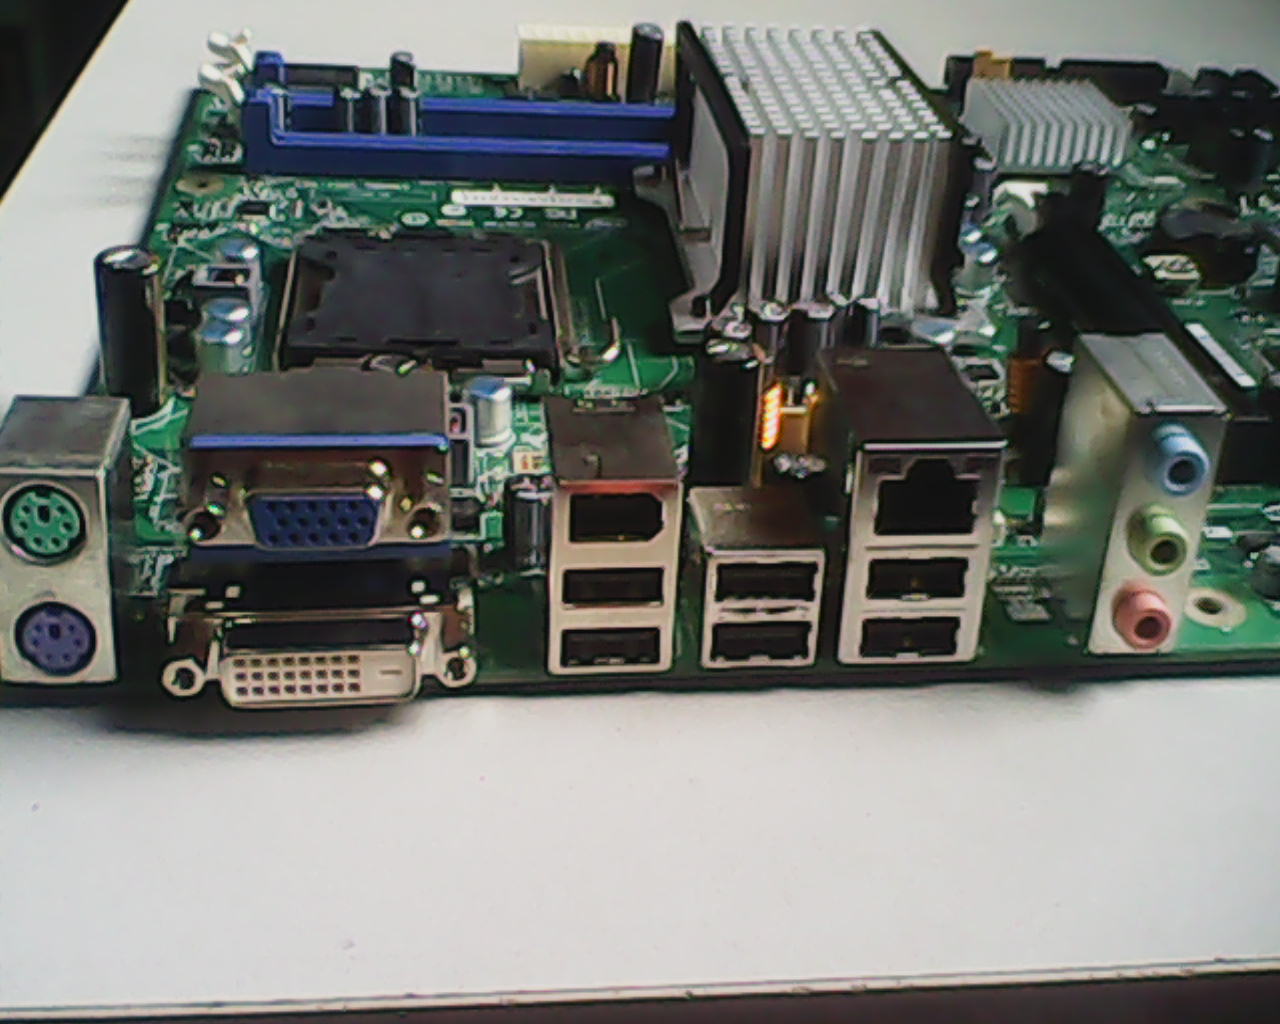 Intel DG43NB g43 motherboard x4500 graphics card 775 ddr2 - Click Image to Close